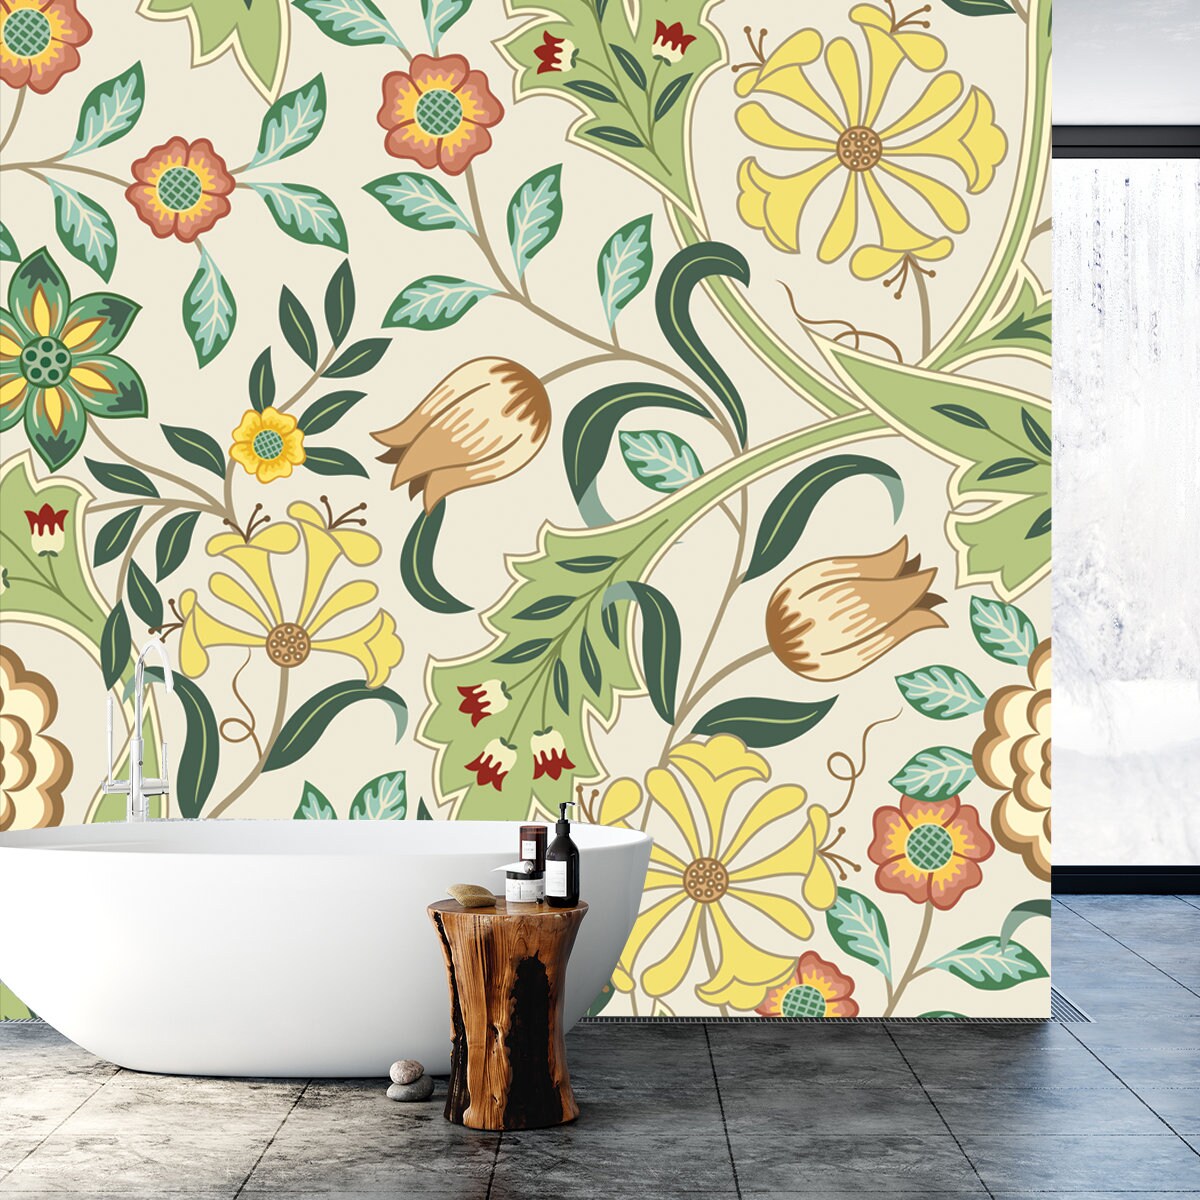 Floral Seamless Pattern with Big Flowers and Foliage on a Light Background Wallpaper Bathroom Mural